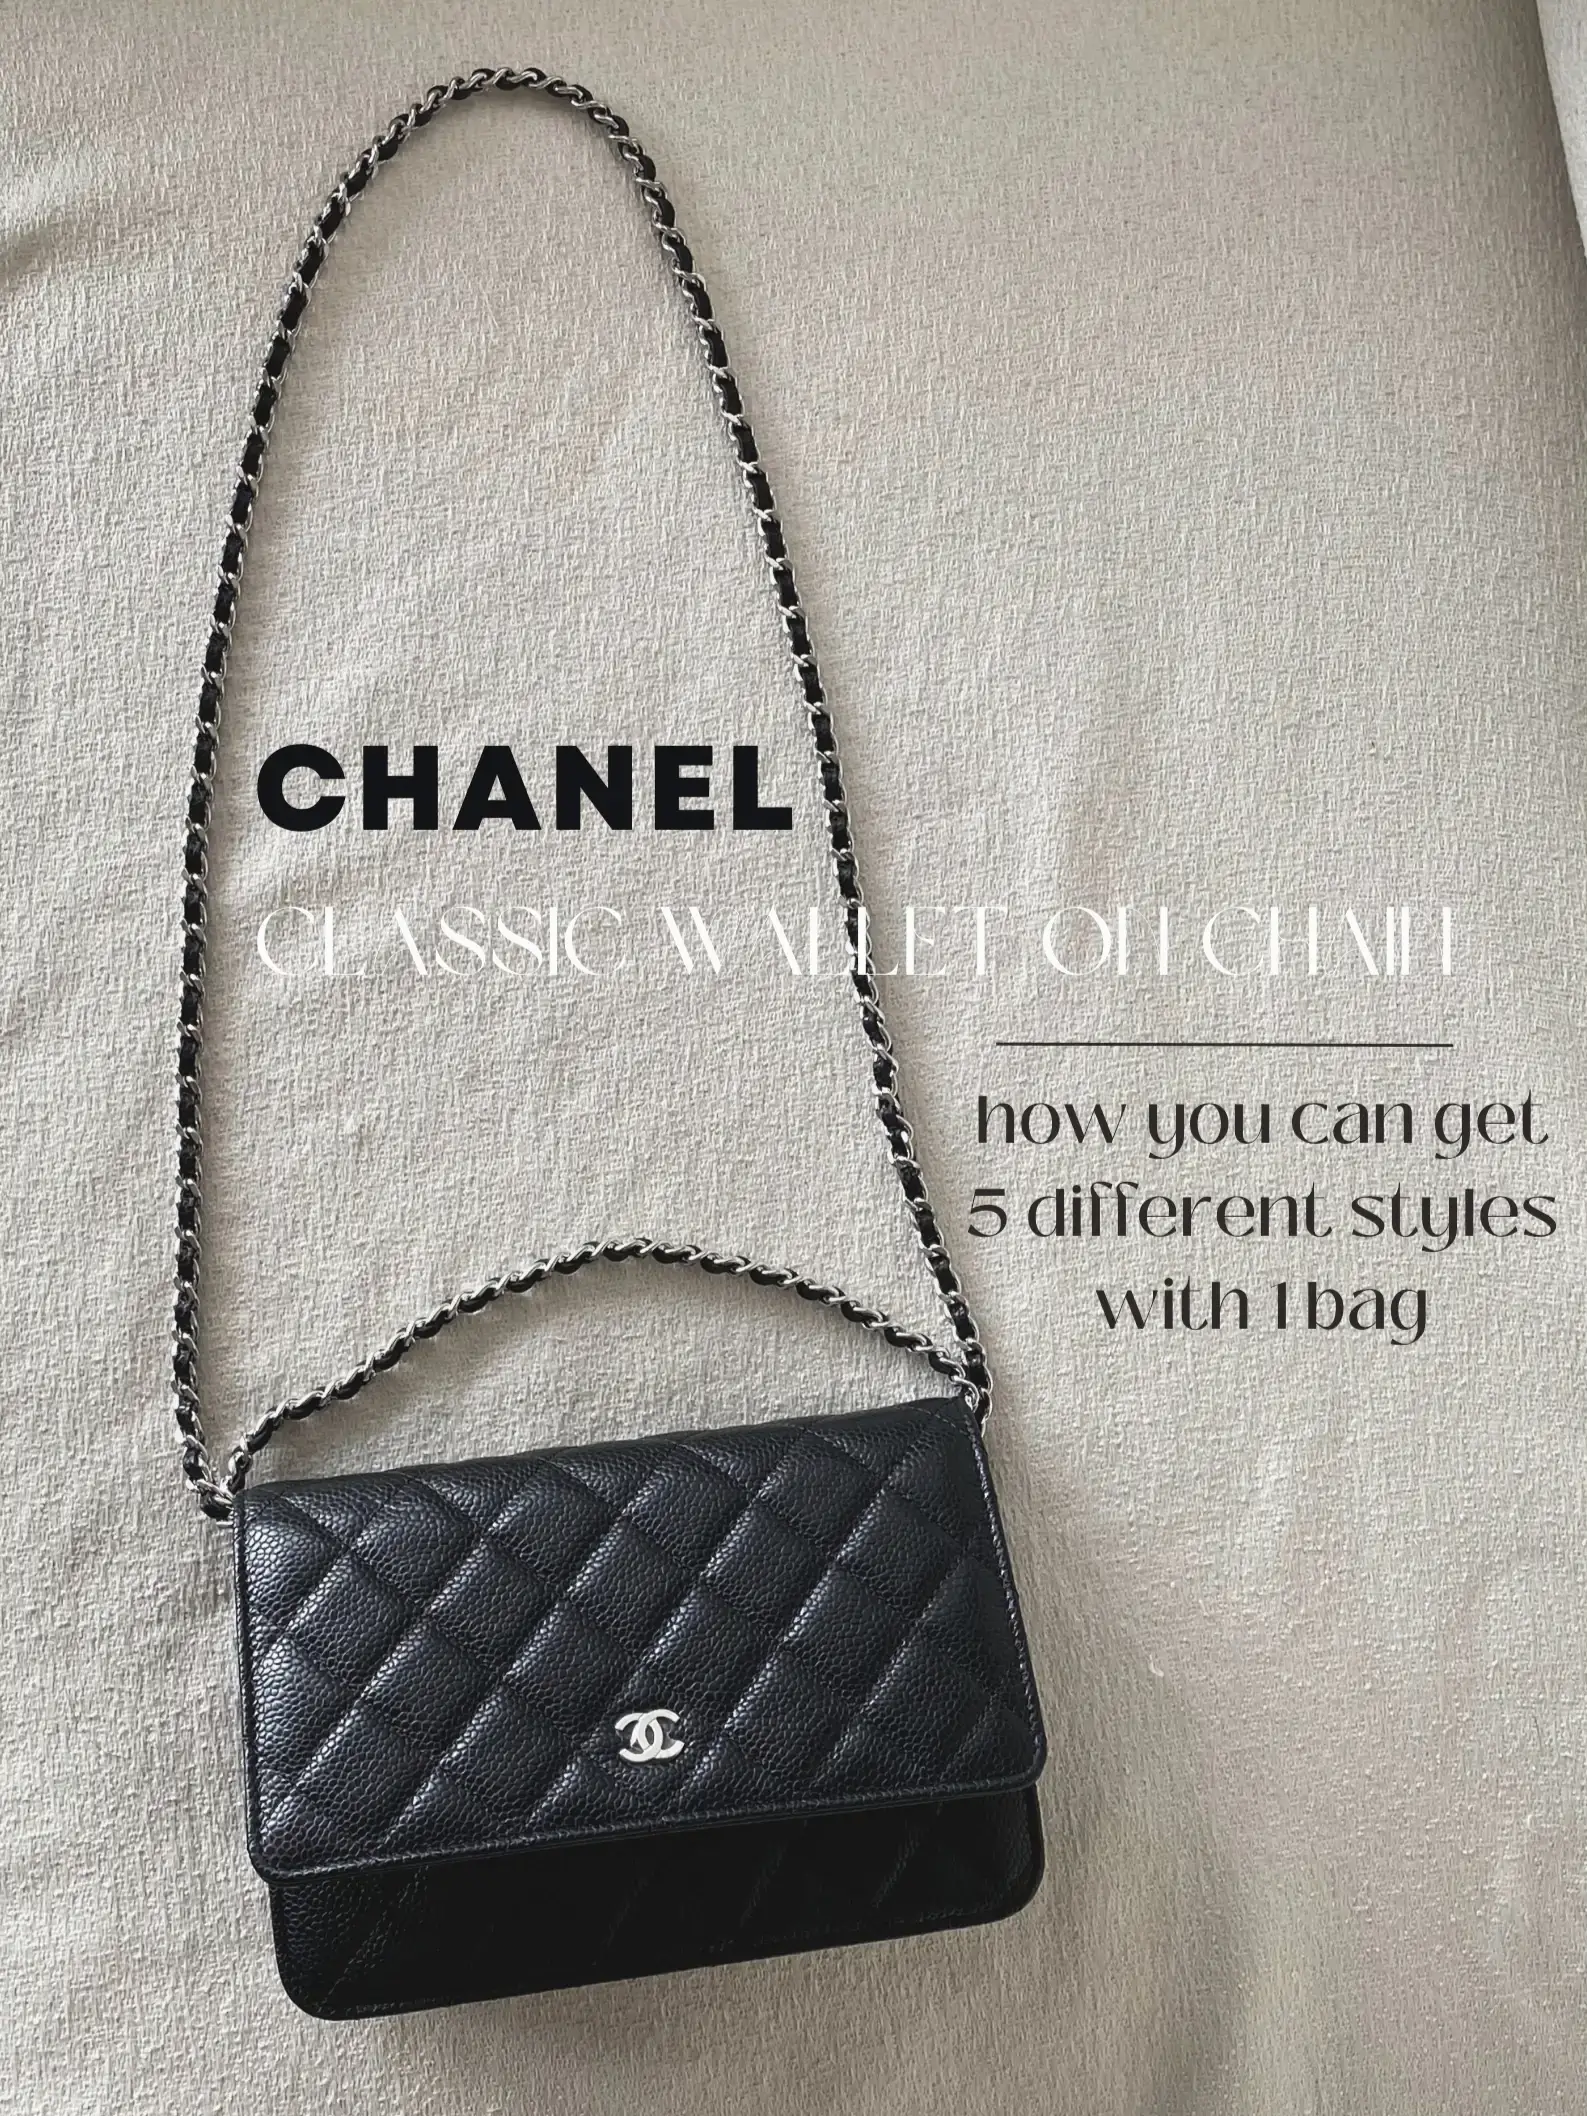 chanel small classic wallet